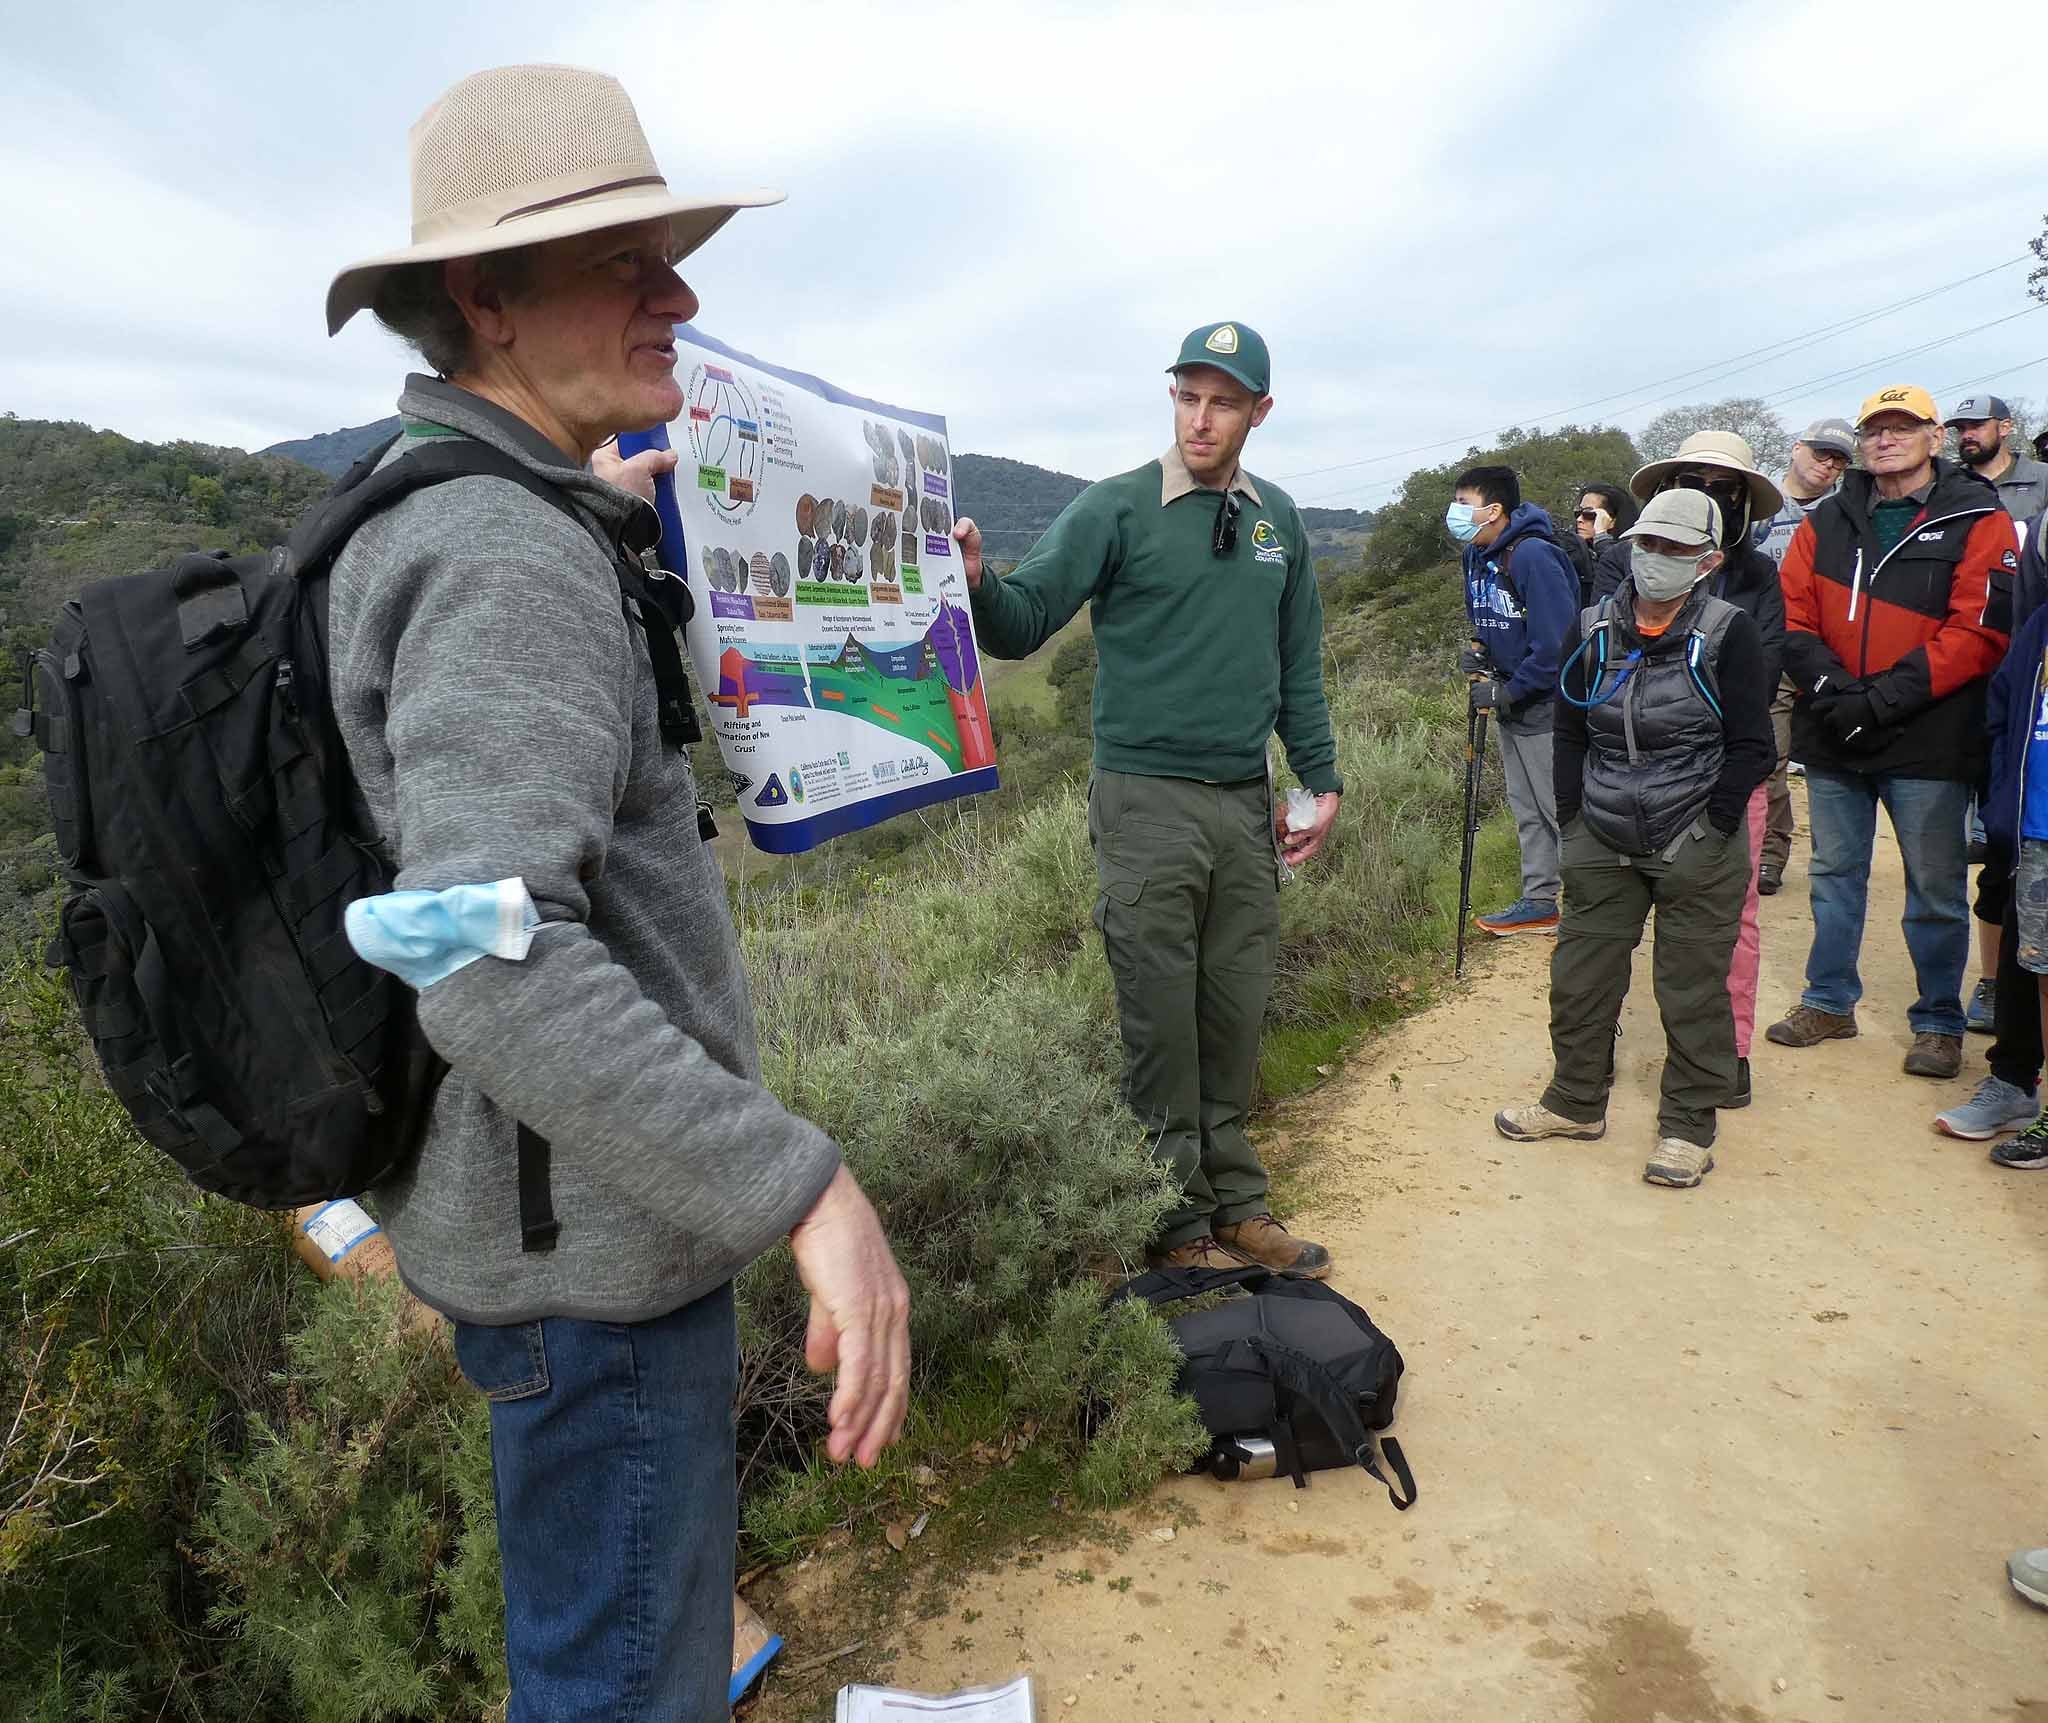 Michael Cox holds a poster about the rock cycle along with a Santa Clara County Park Interpreter while talking with the public on a trail.